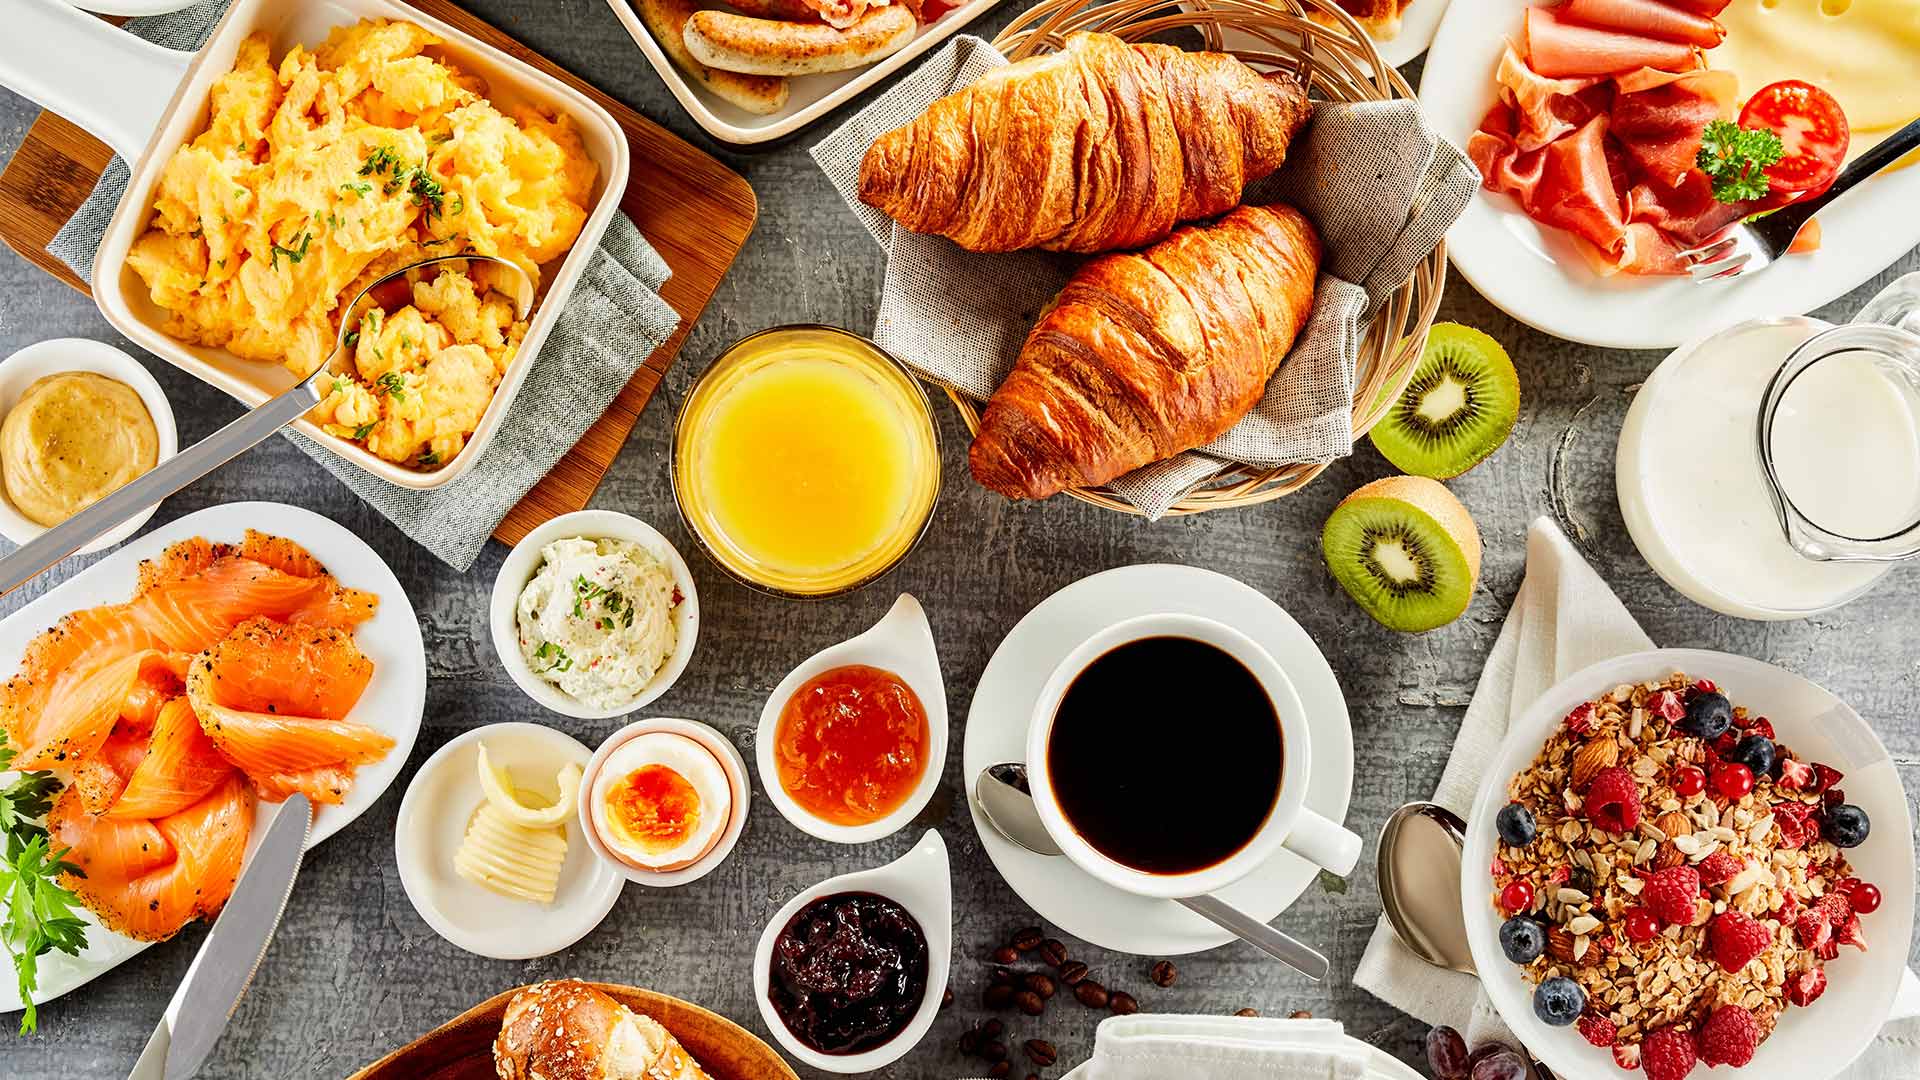 Bread, fruits, eggs and coffee served at the some of the best breakfast restaurants in Singapore